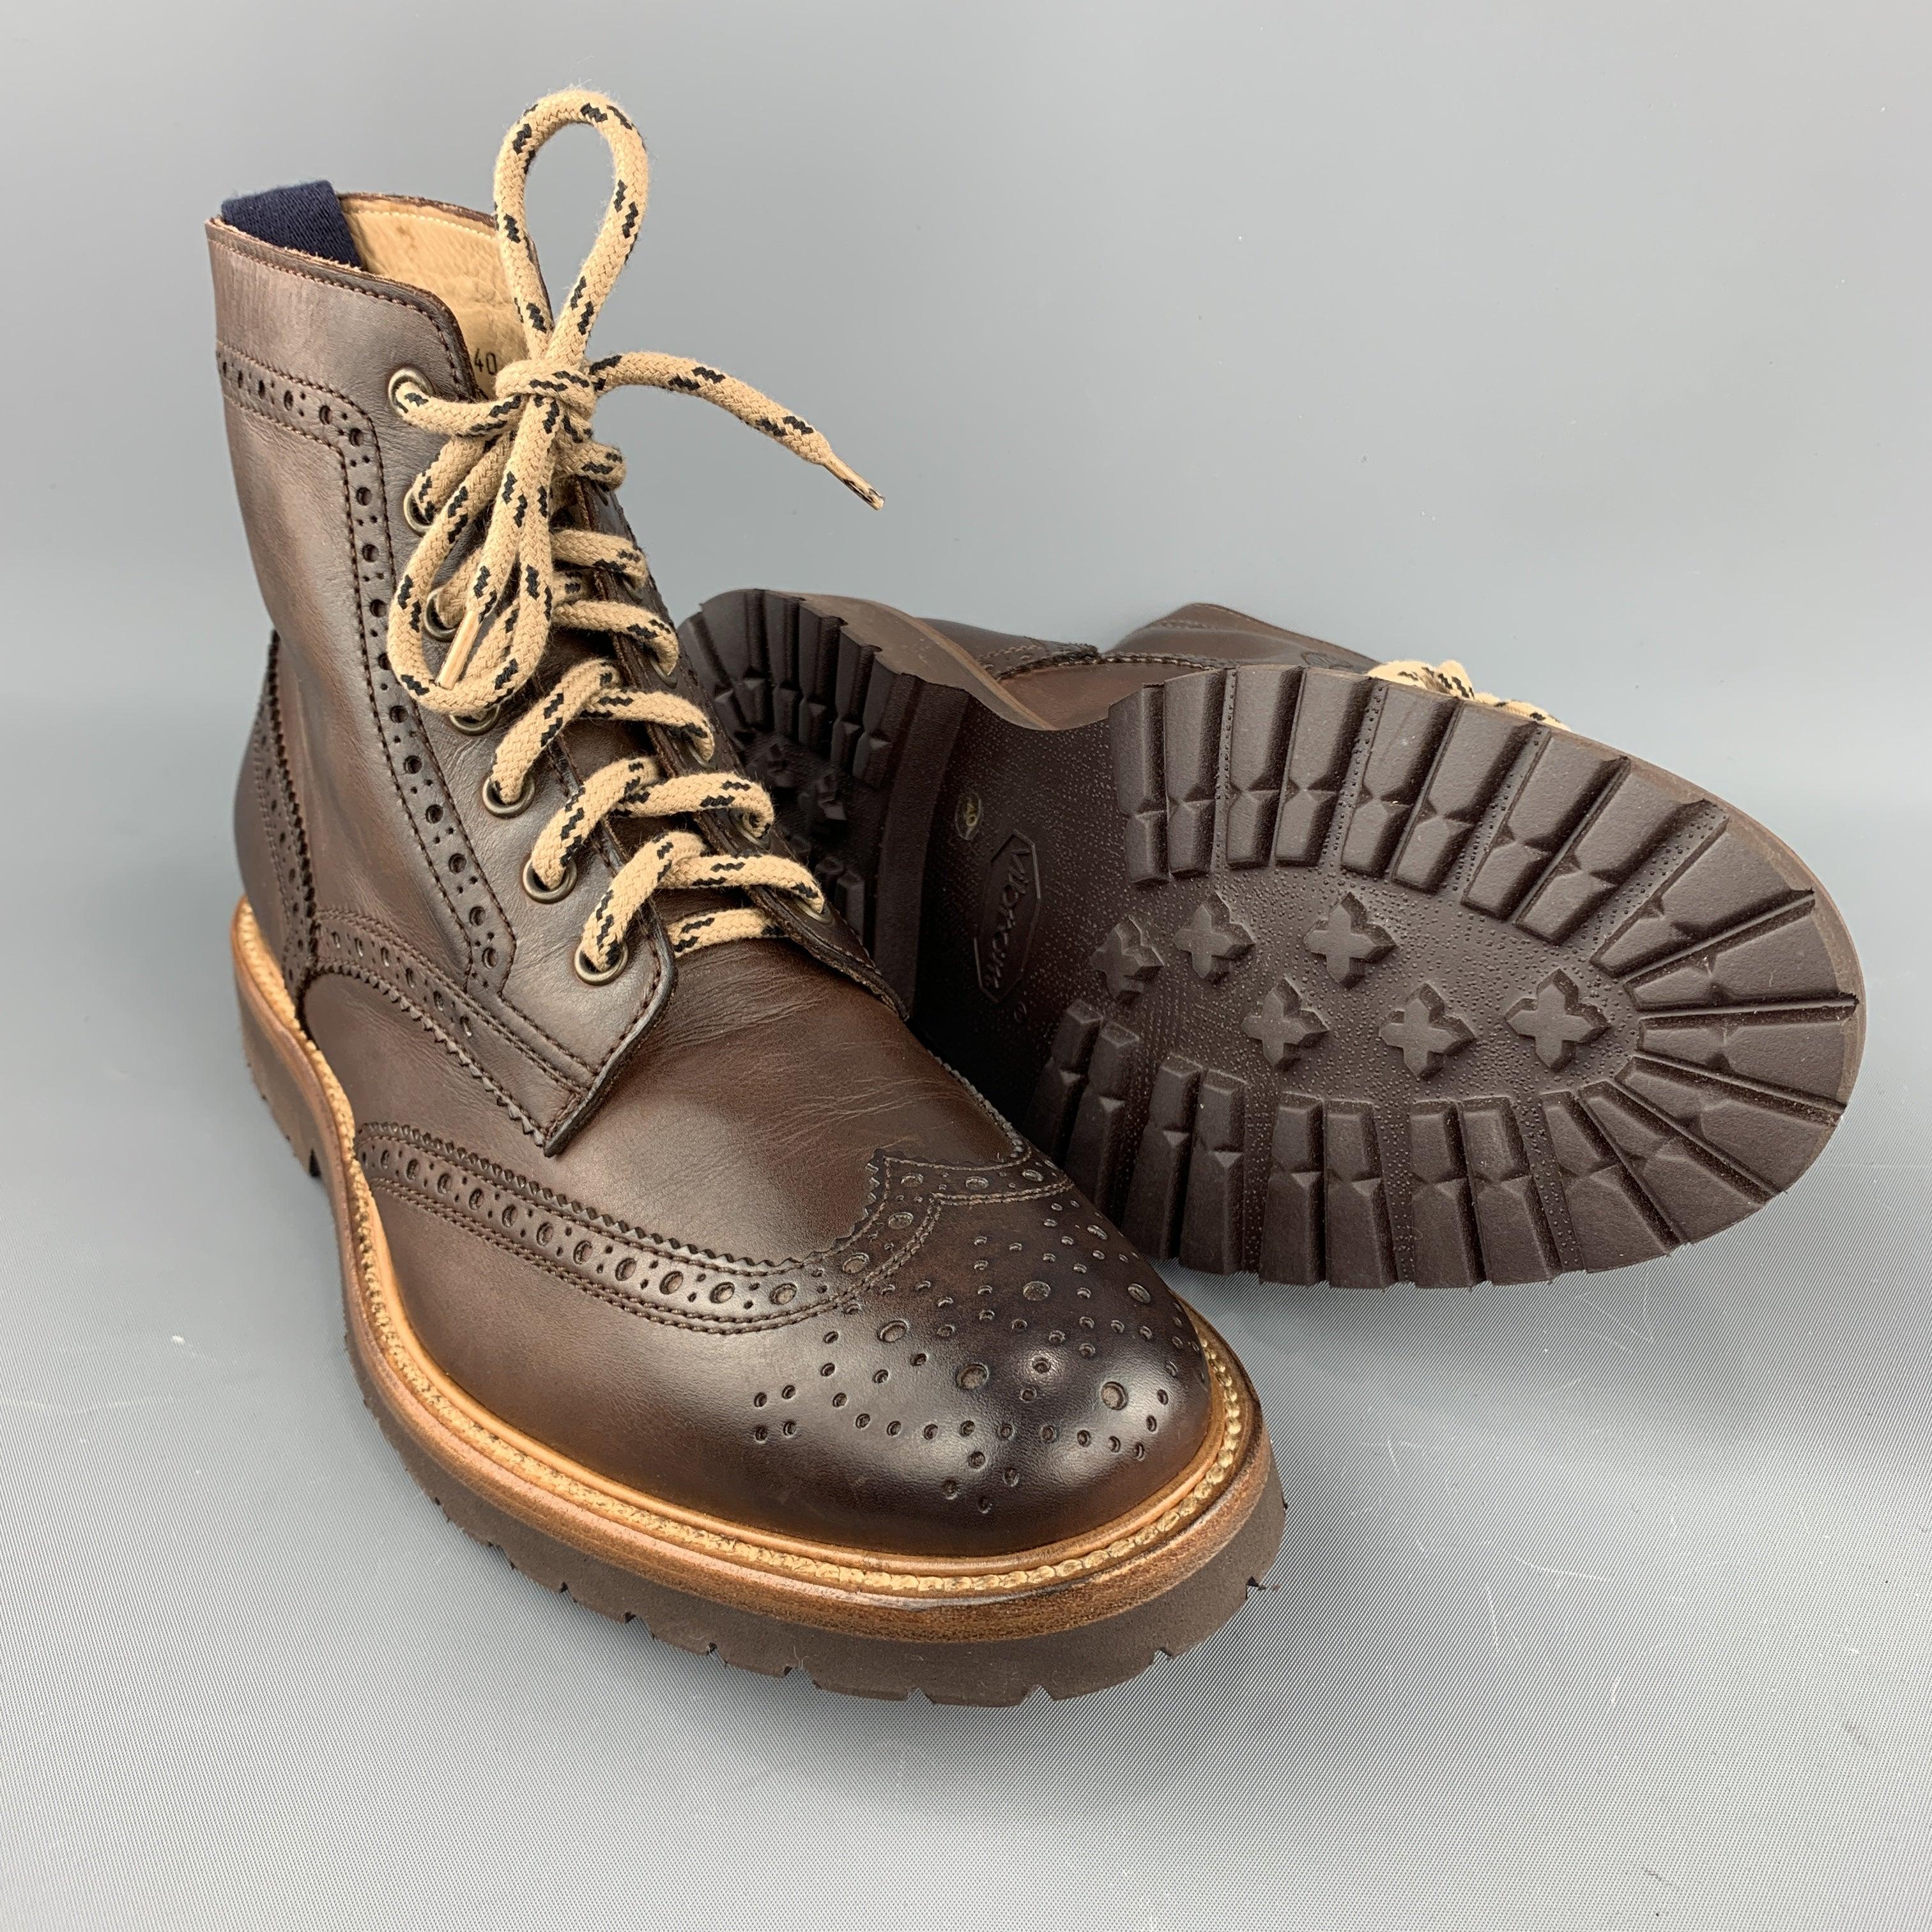 BRUNELLO CUCINELLI Size 7 Brown Perforated Leather Lace Up Boots In Good Condition For Sale In San Francisco, CA